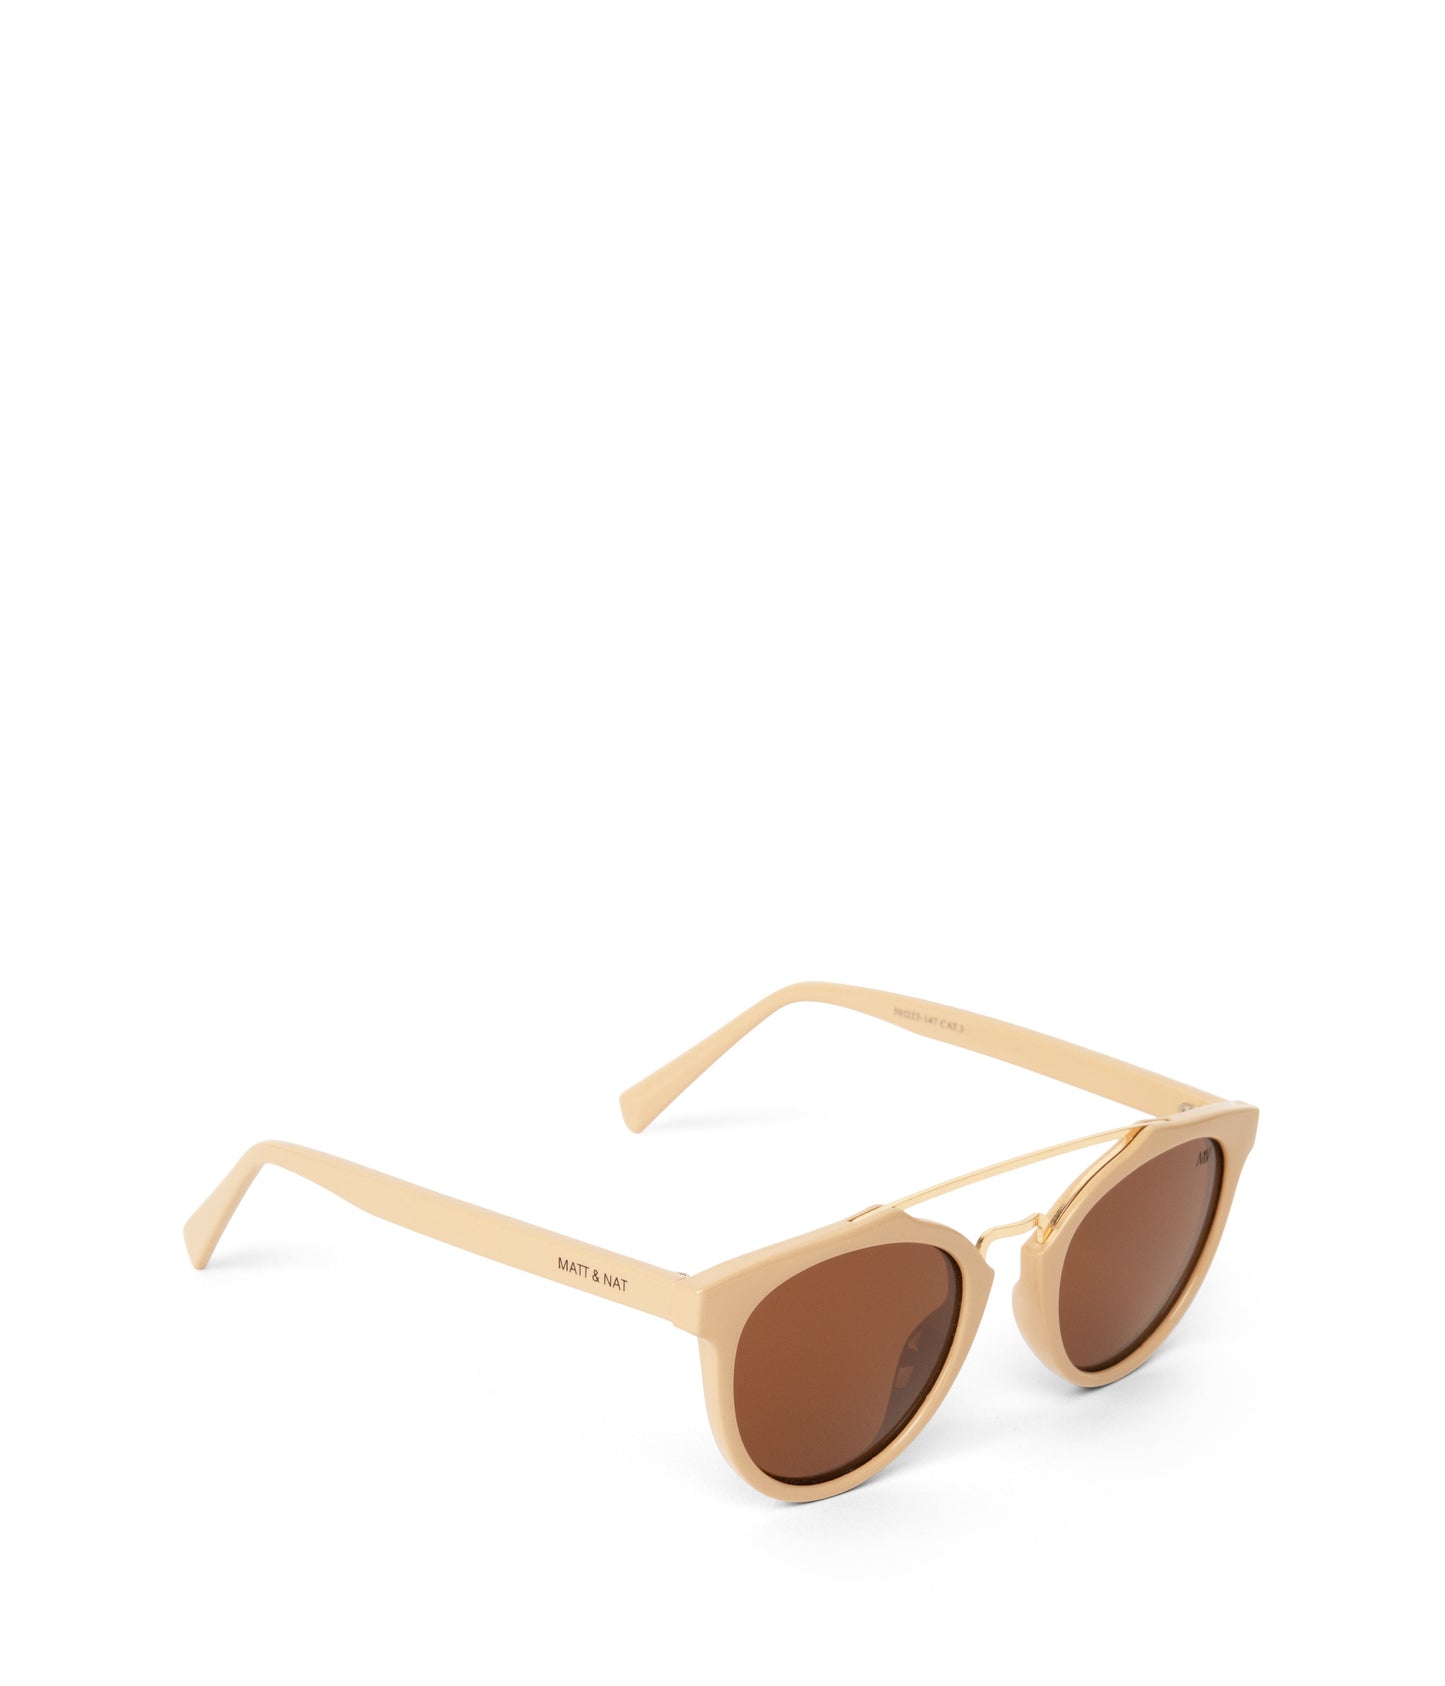 ALDIE-2 Round Recycled Sunglasses | Color: White, Brown - variant::nude